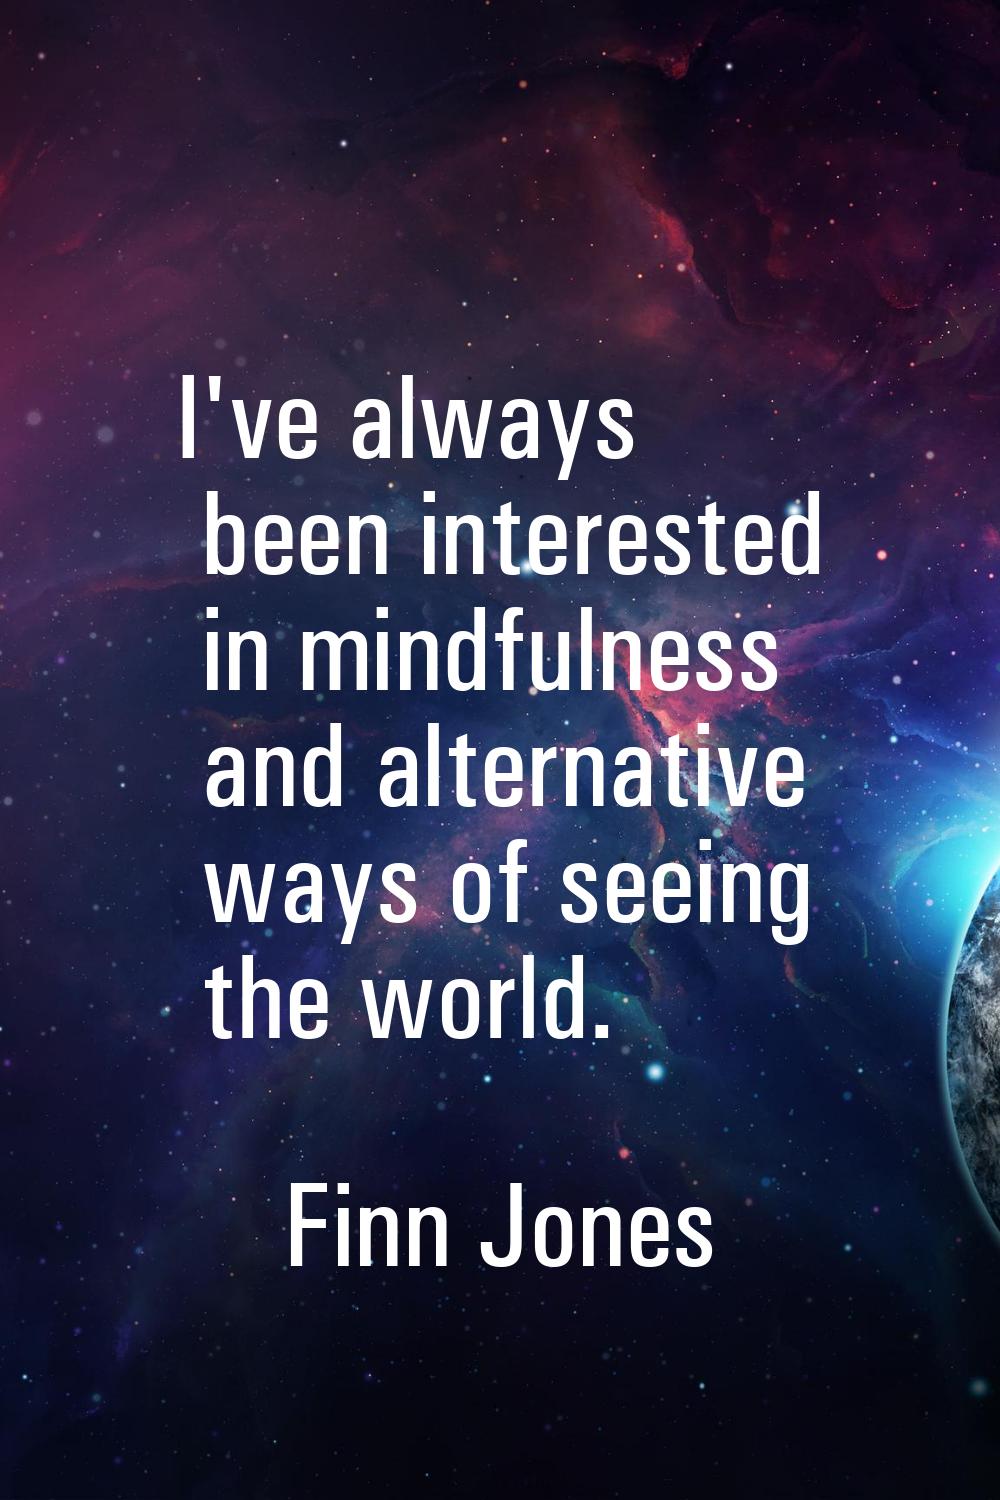 I've always been interested in mindfulness and alternative ways of seeing the world.